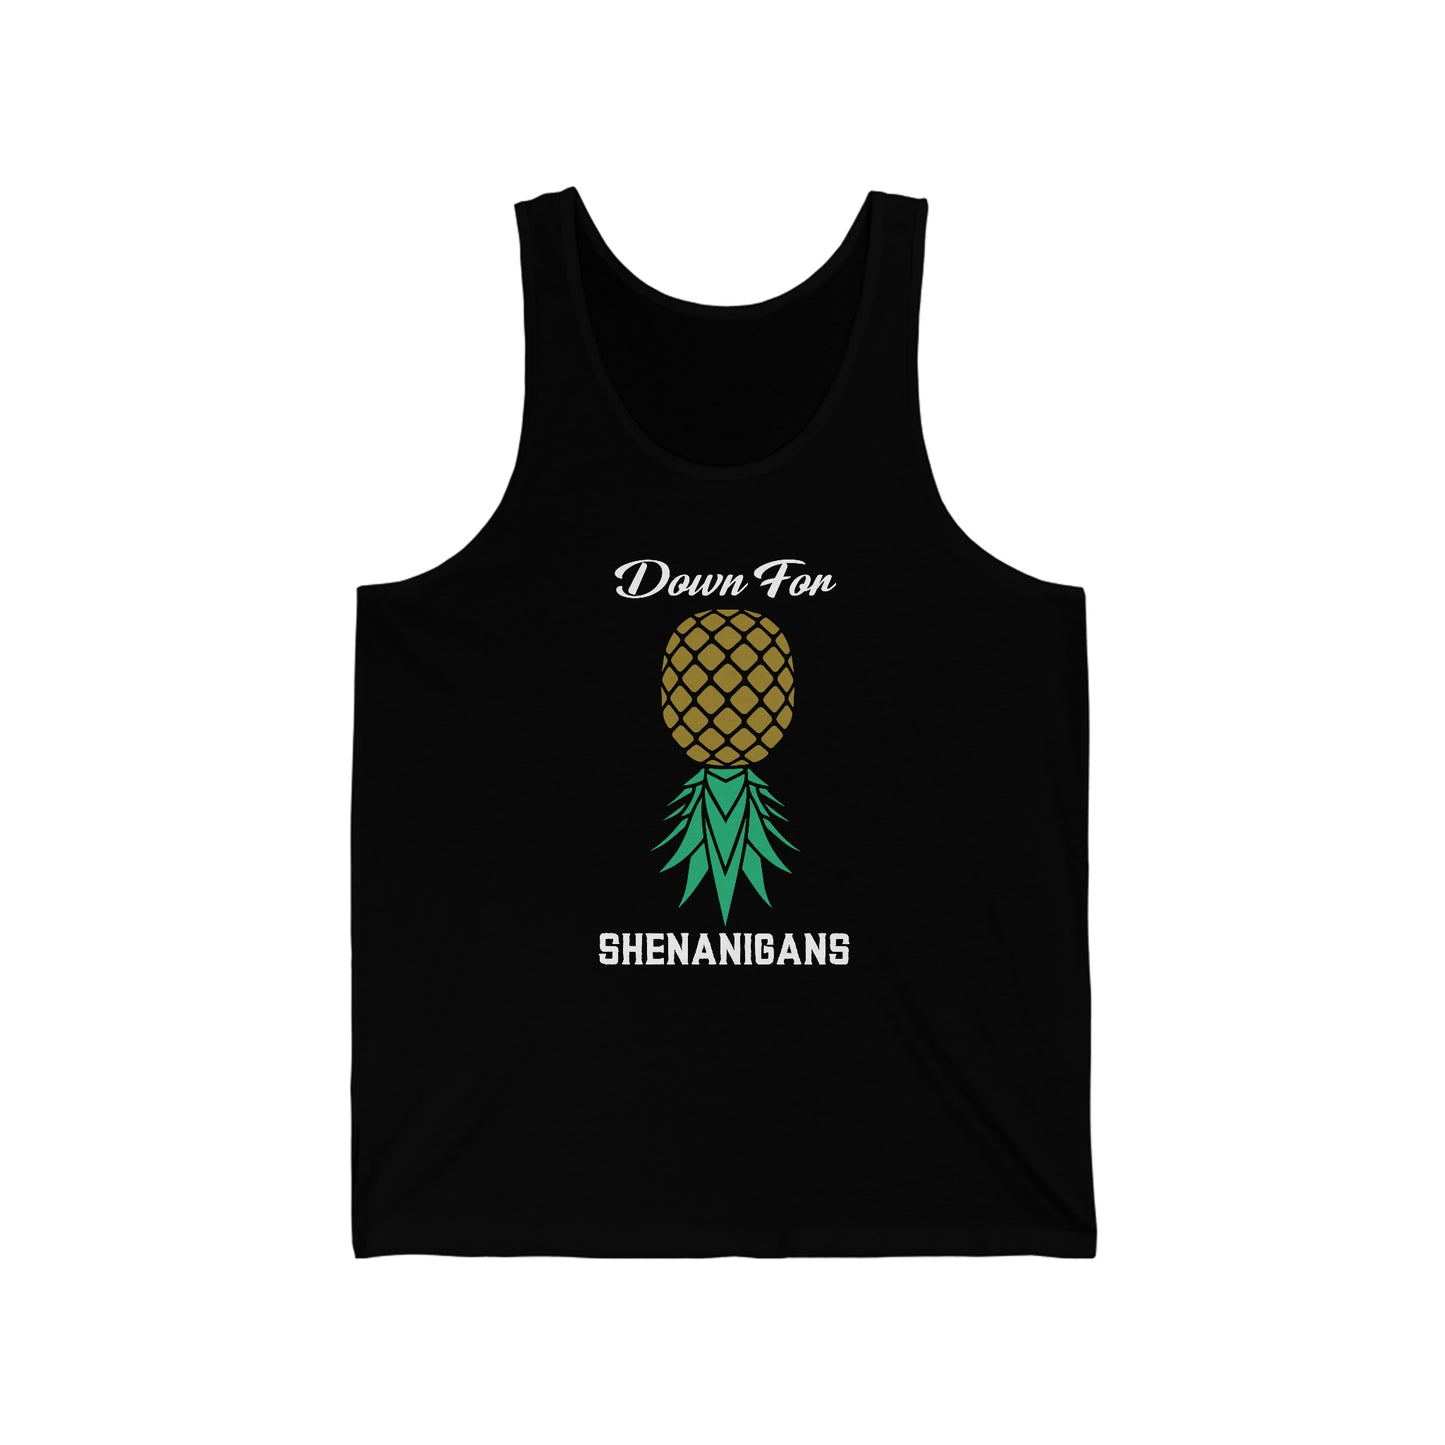 Down For Shenanigans Unisex Jersey Tank